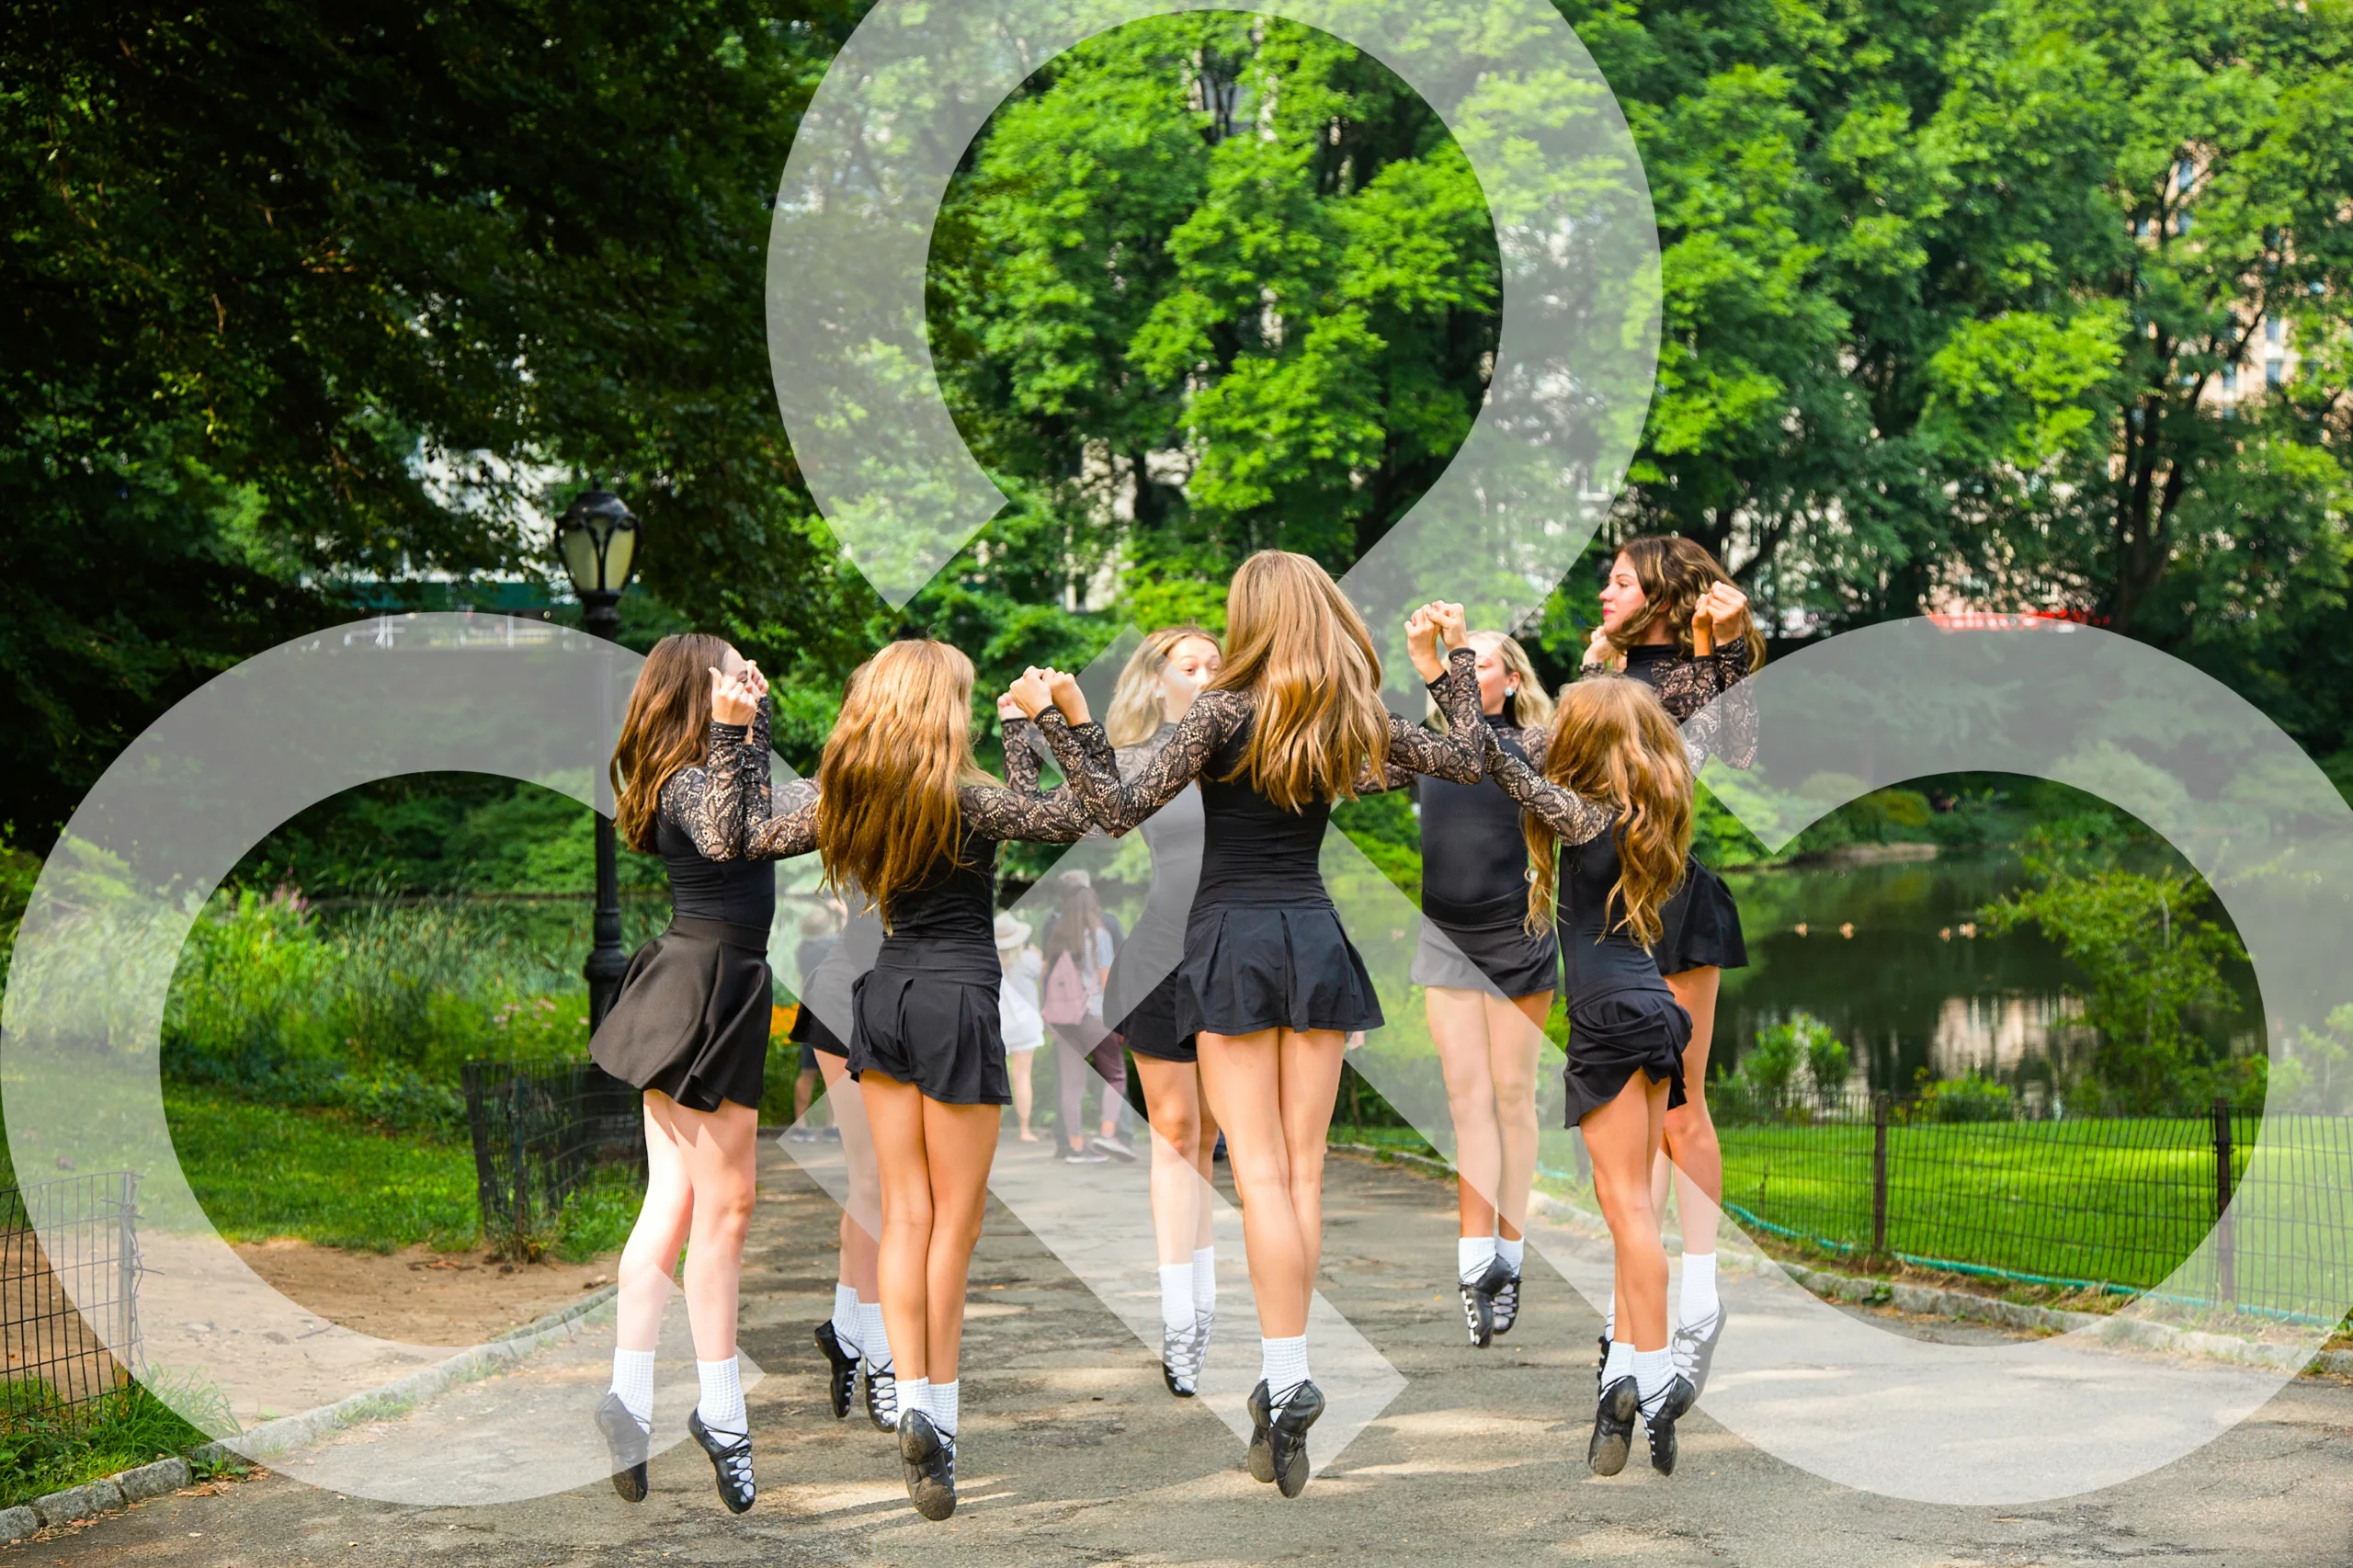 Eight ceili dancers dance in a circle showing off one of the types of Irish dance.